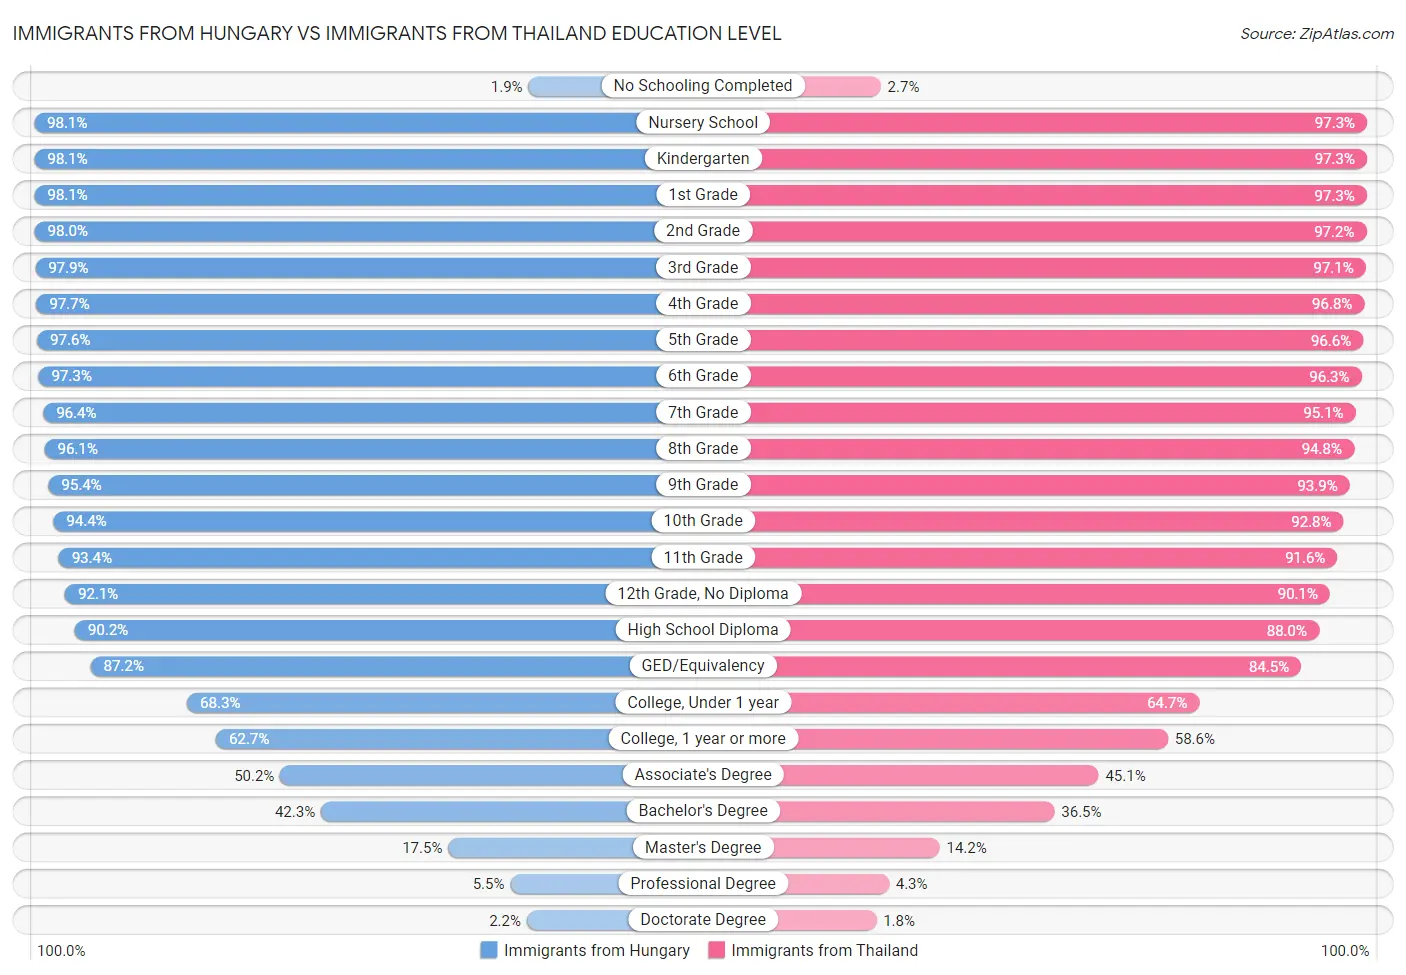 Immigrants from Hungary vs Immigrants from Thailand Education Level